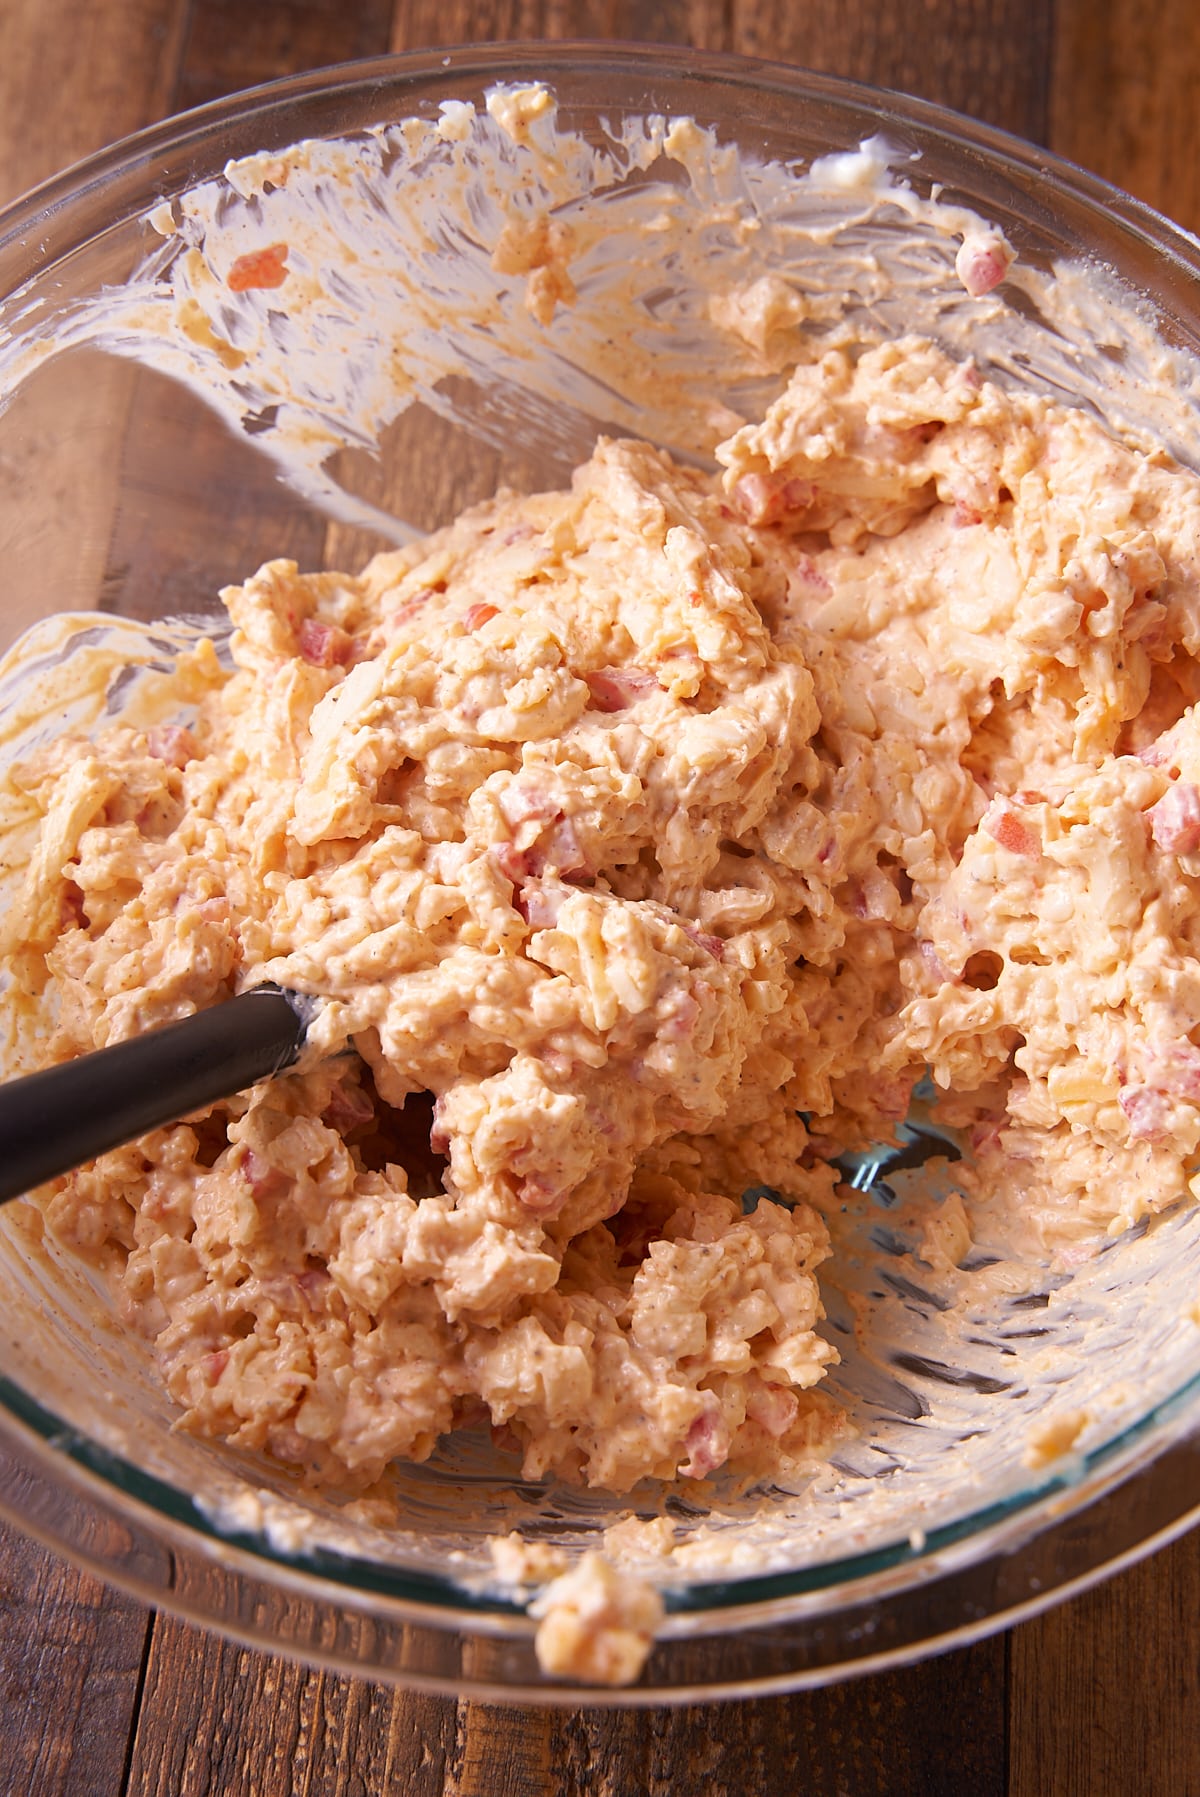 Mixing the pimento cheese in a bowl.